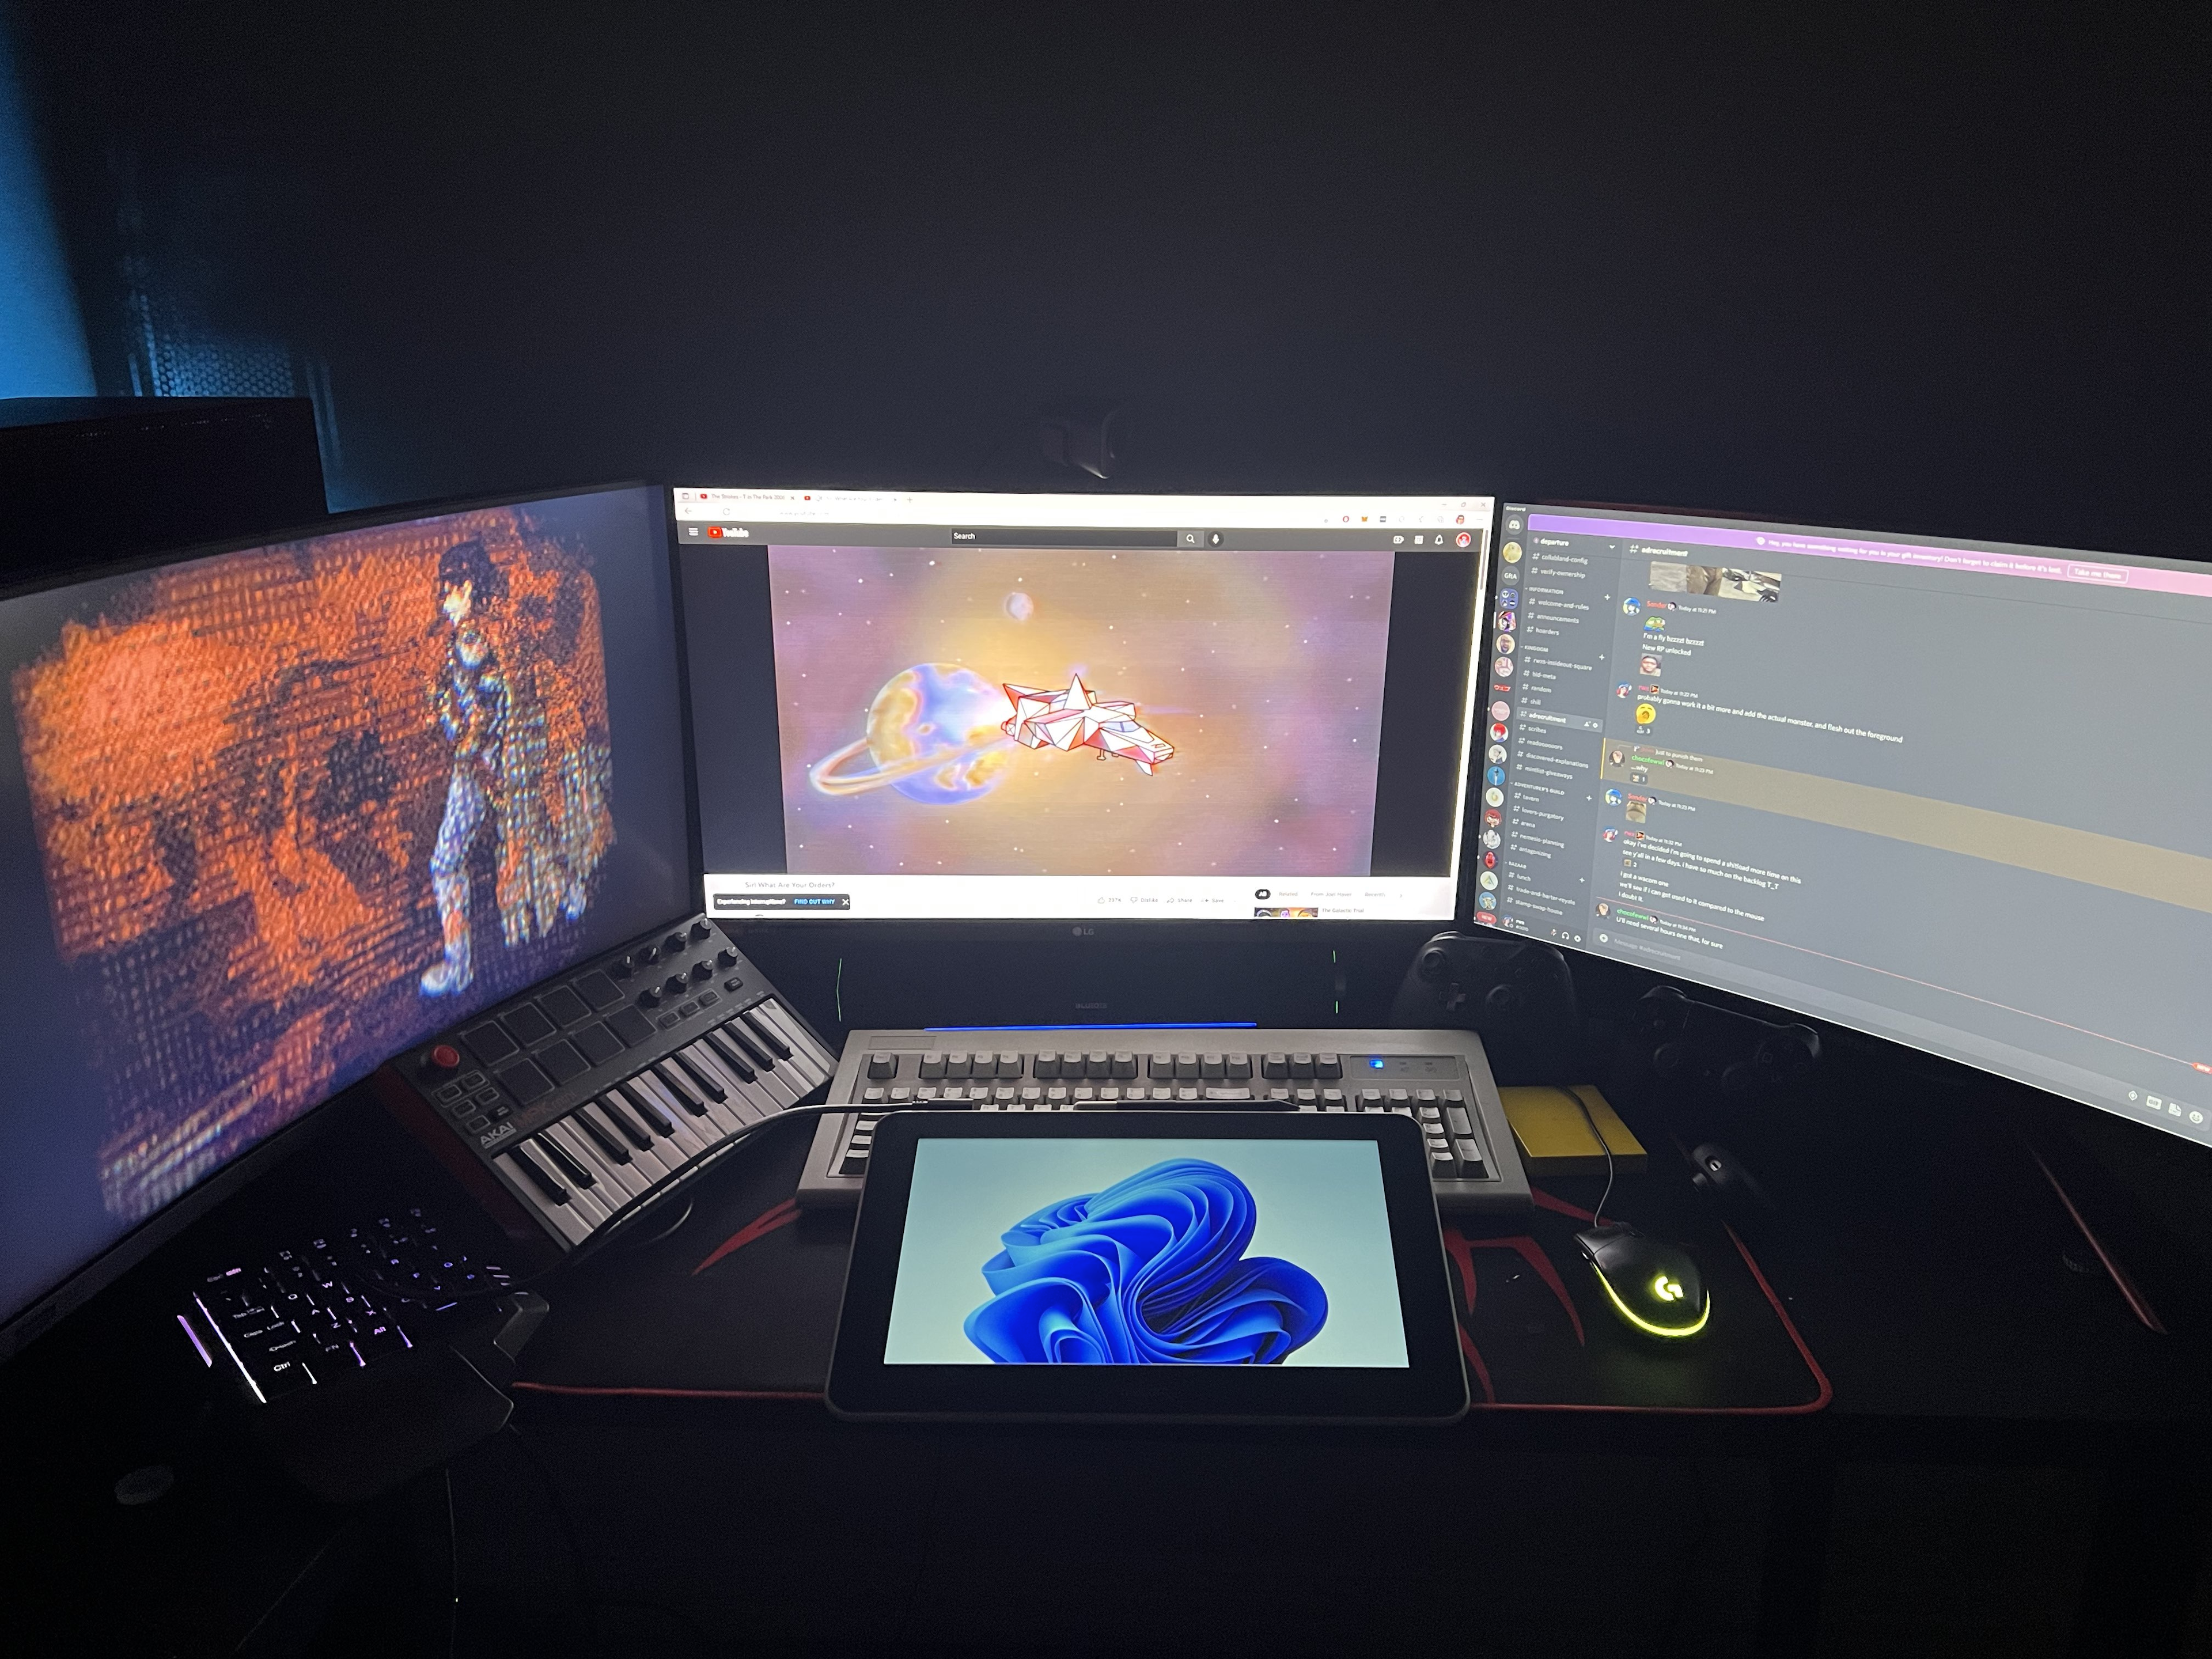 Robek's setup. Fun fact: Robek uses a mouse, not a tablet, for most of their creating. 